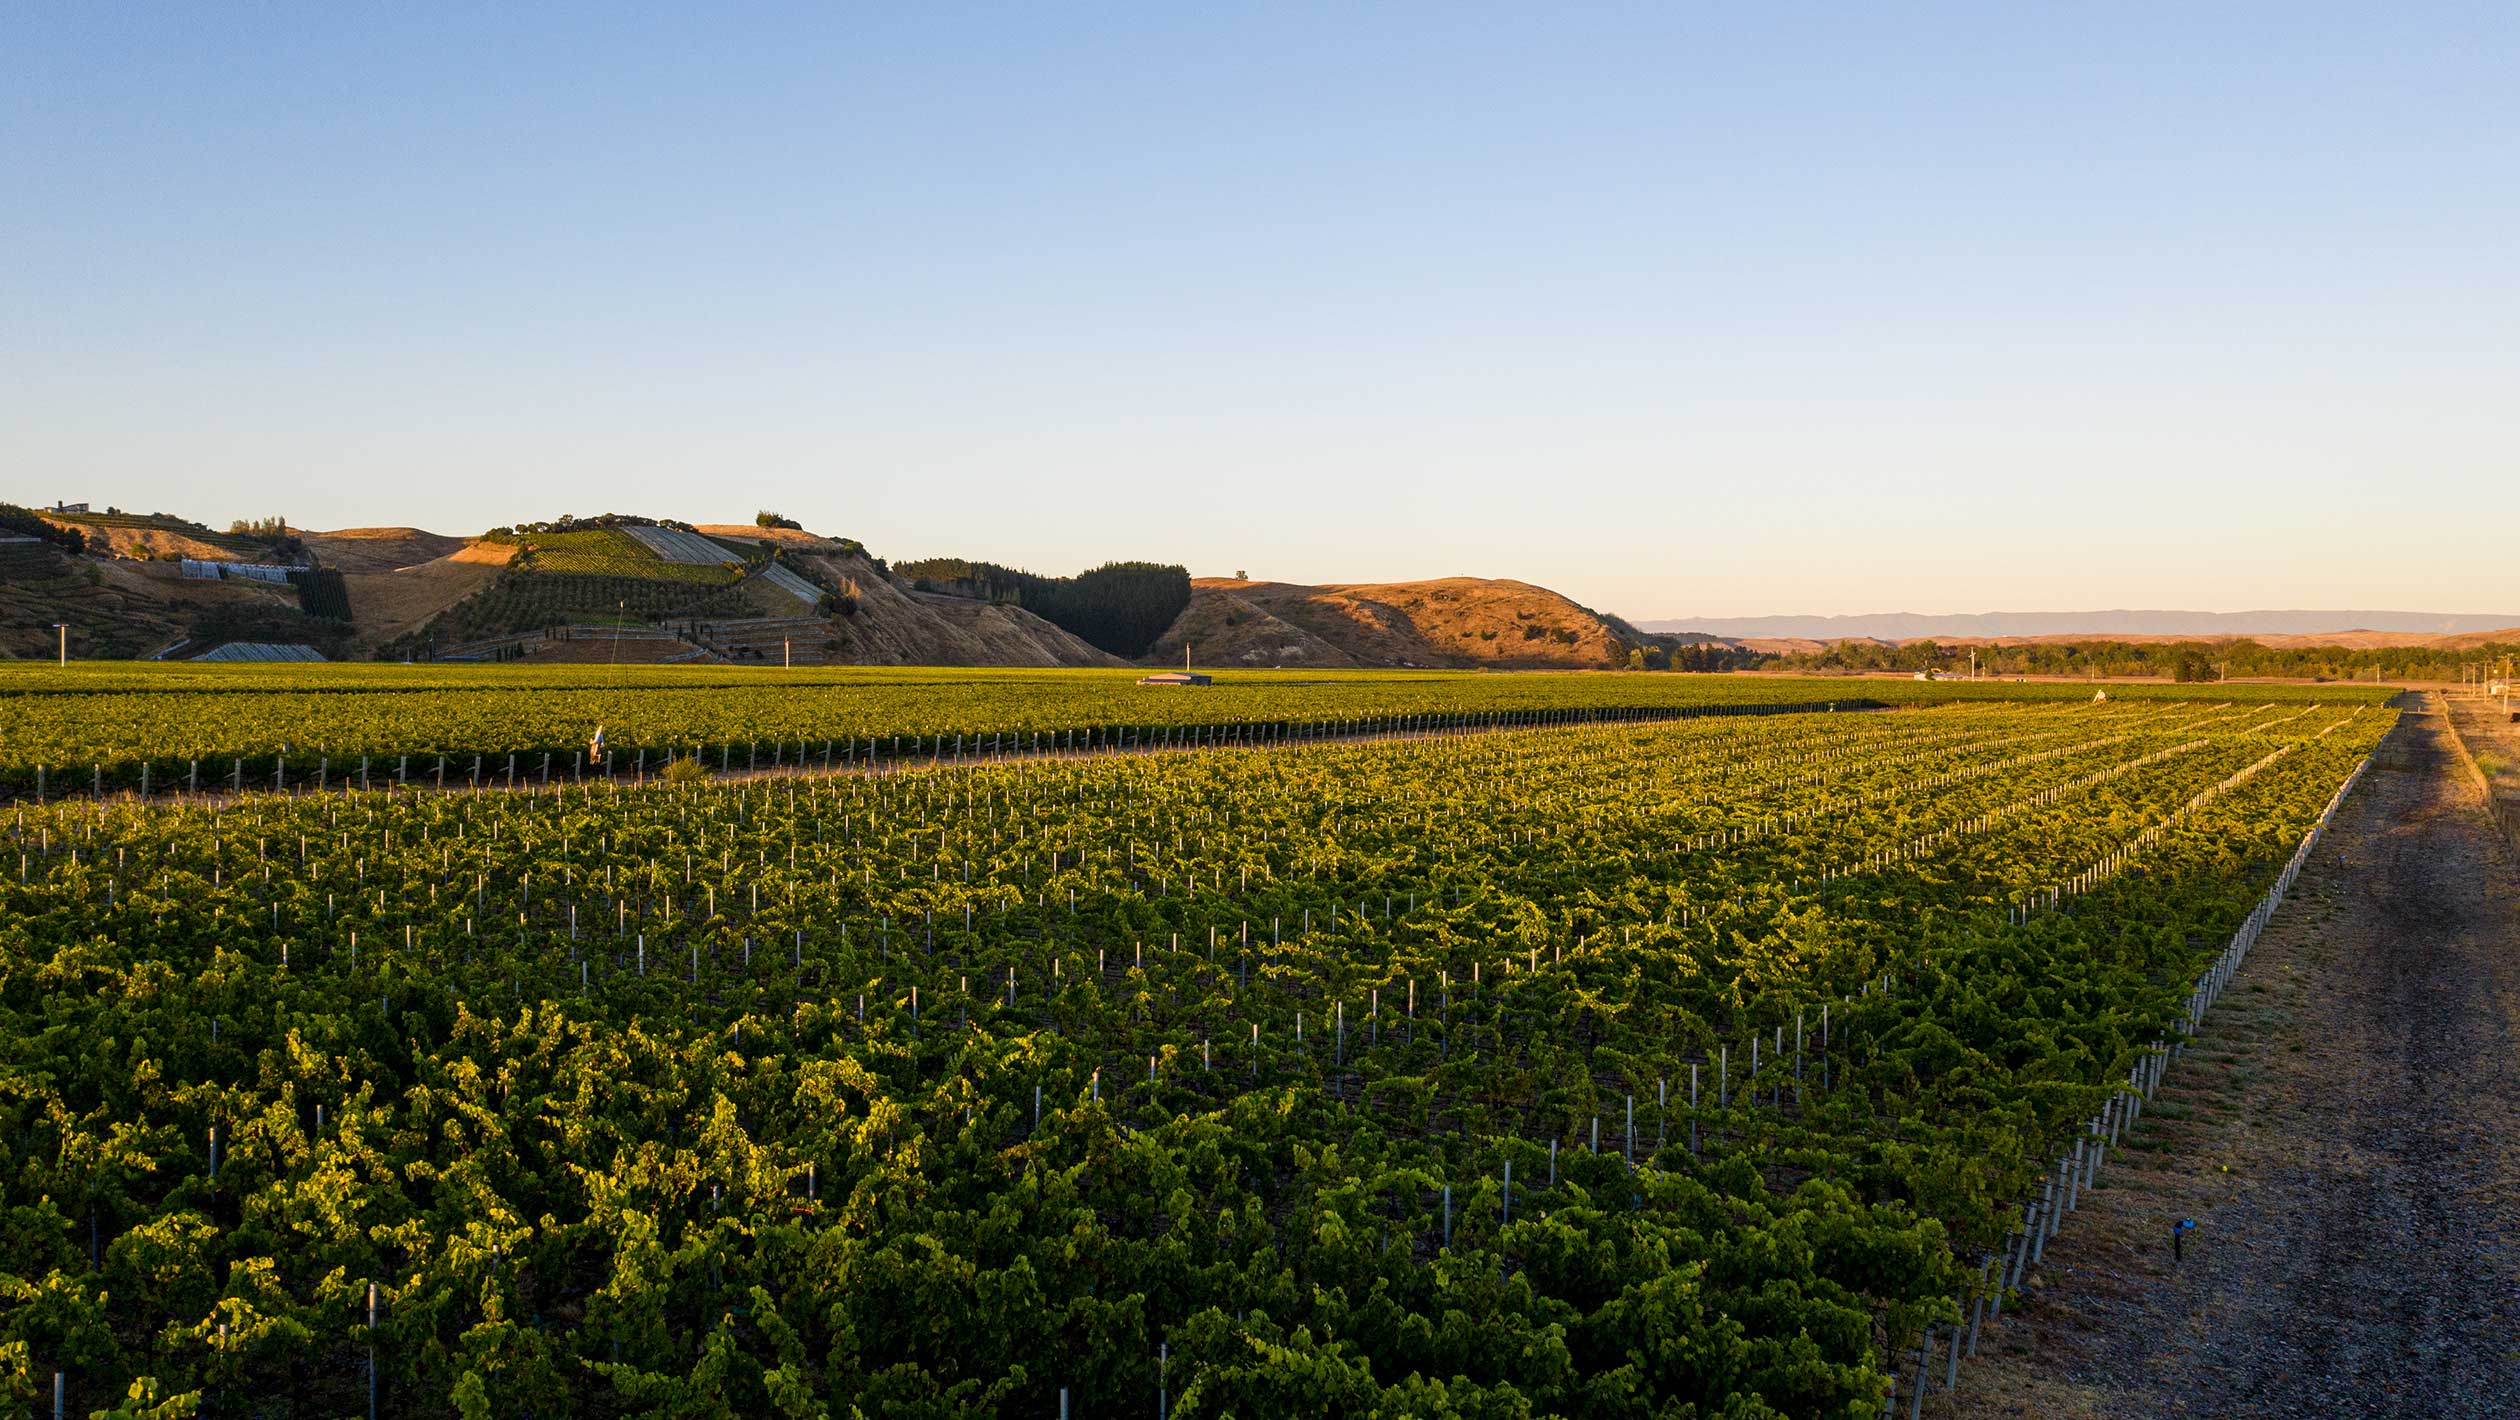 A scenic photograph of a large Chardonnay vineyard in Hawke's Bay, New Zealand